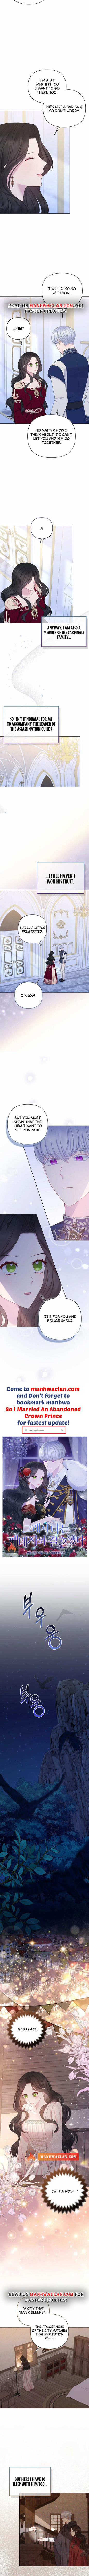 So I Married An Abandoned Crown Prince - Page 3